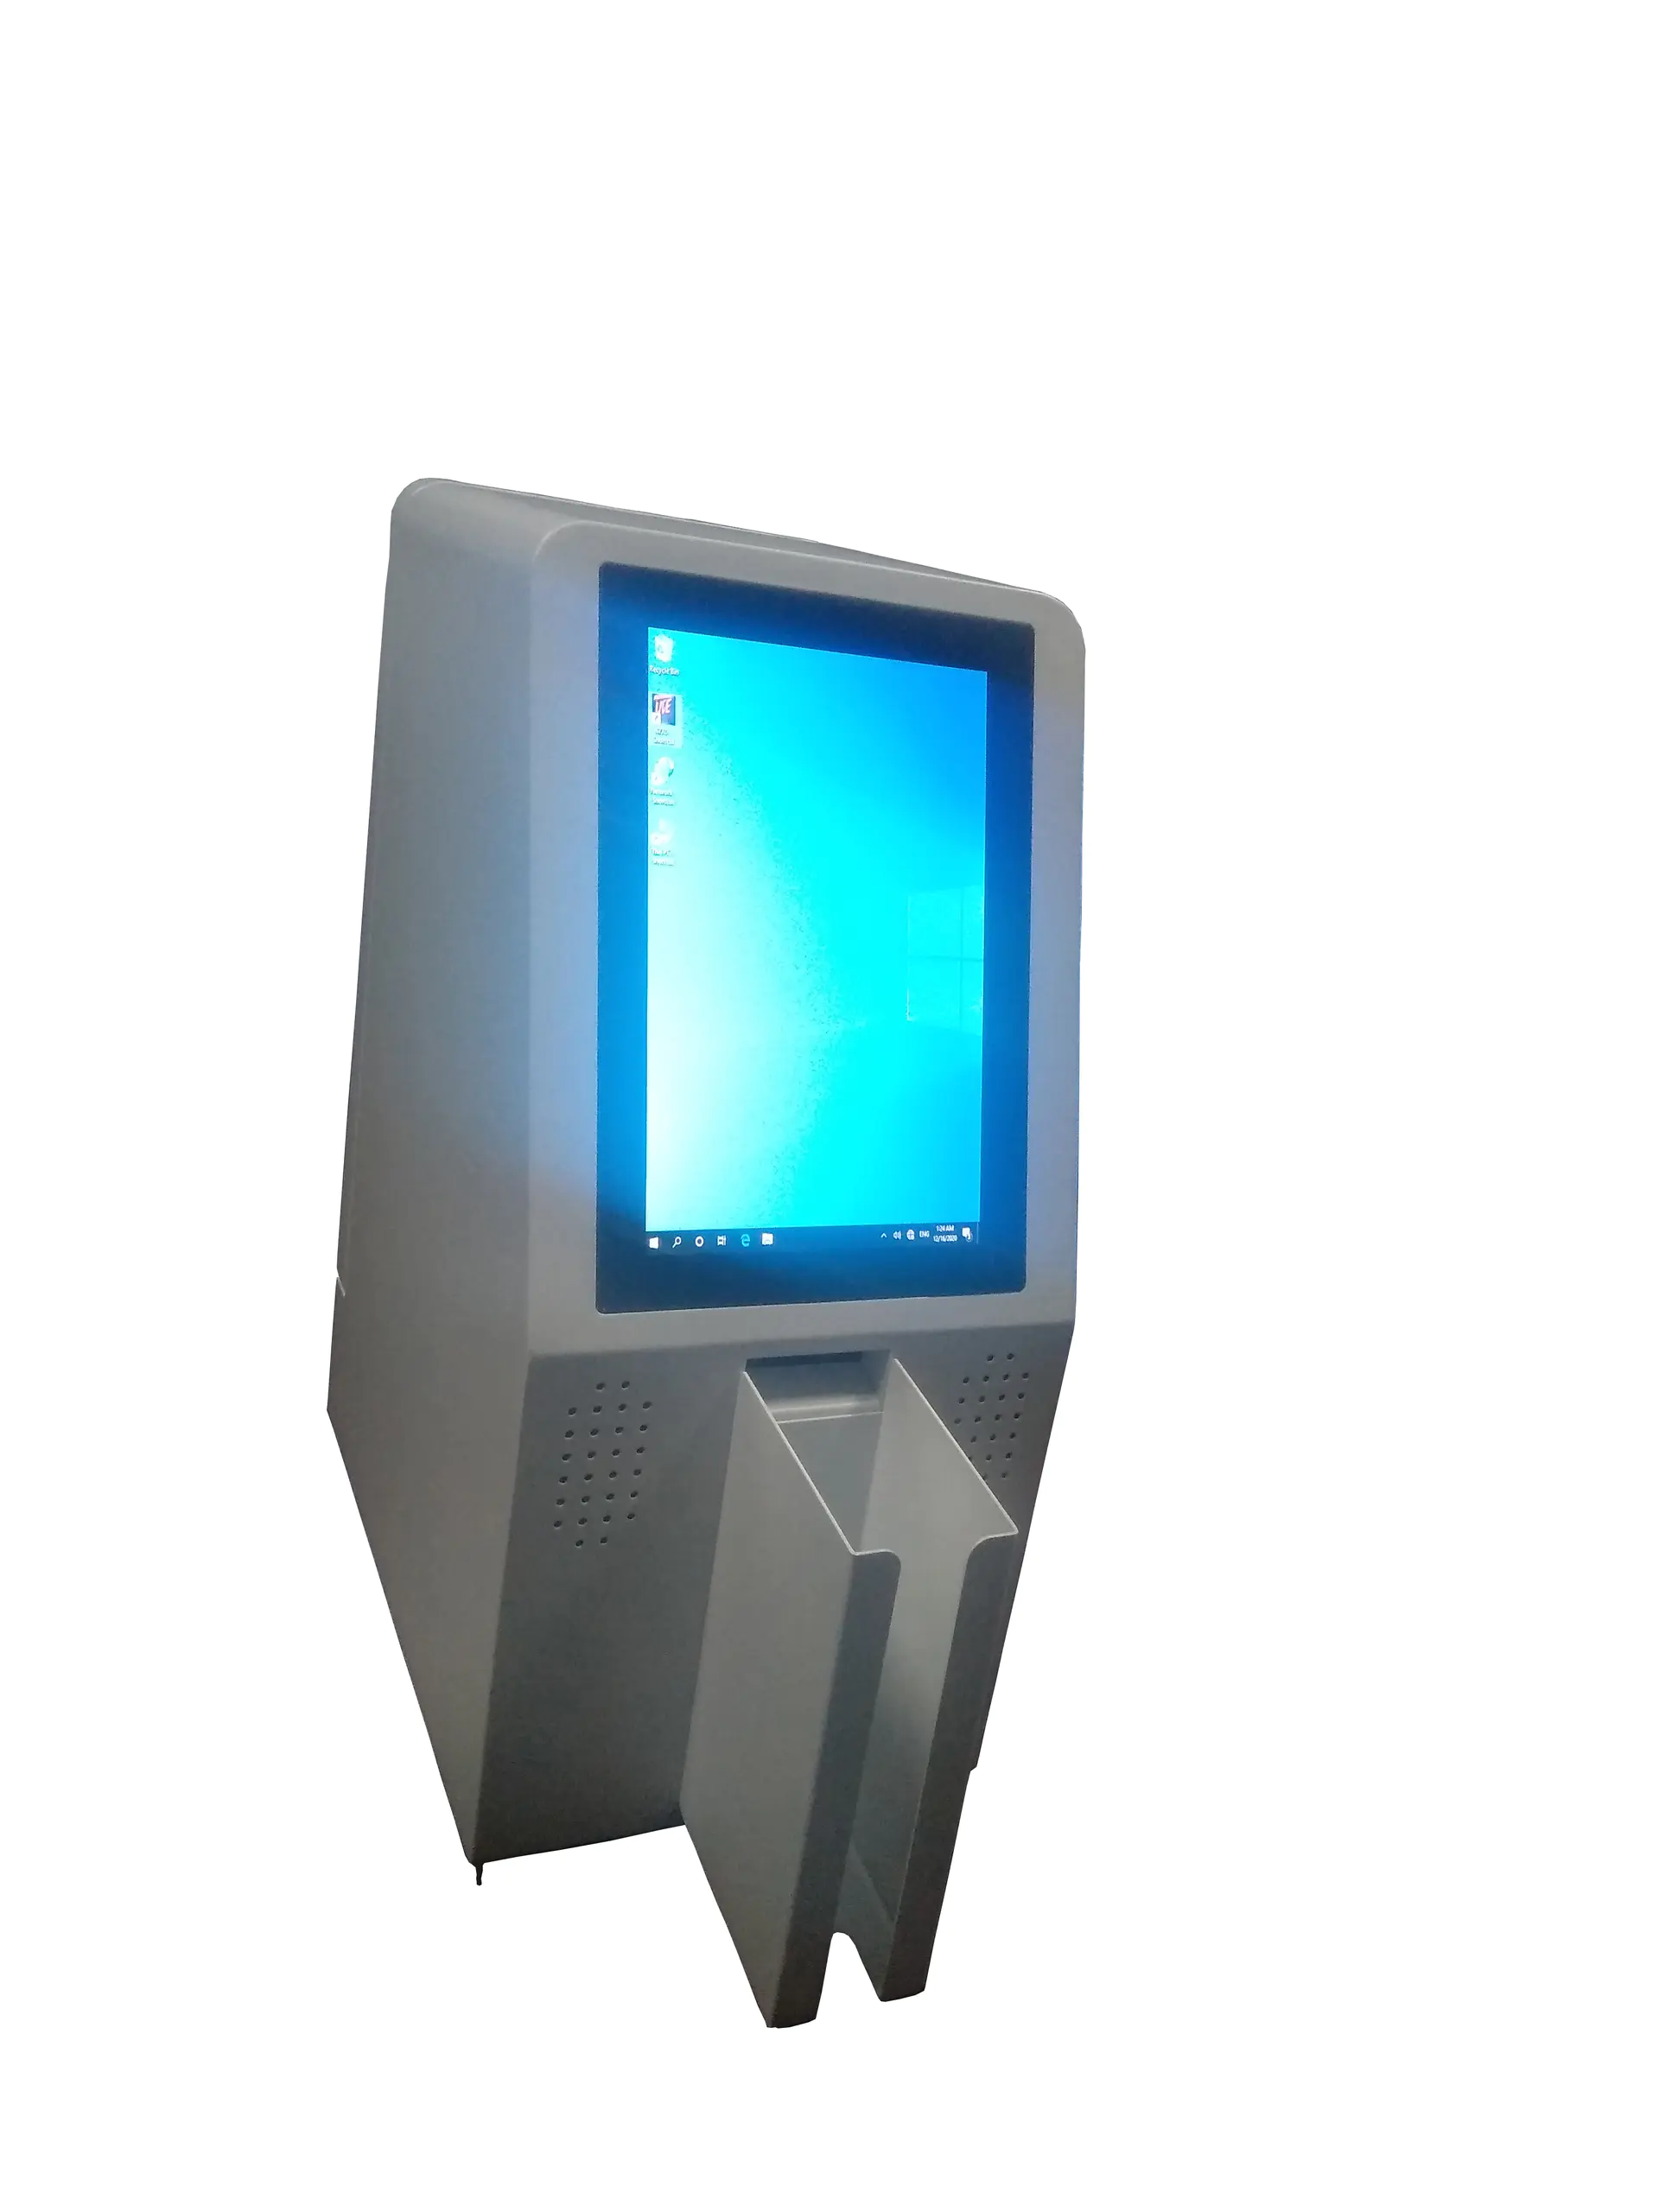 digital signage card dispensing kiosk with for office hotel public security room